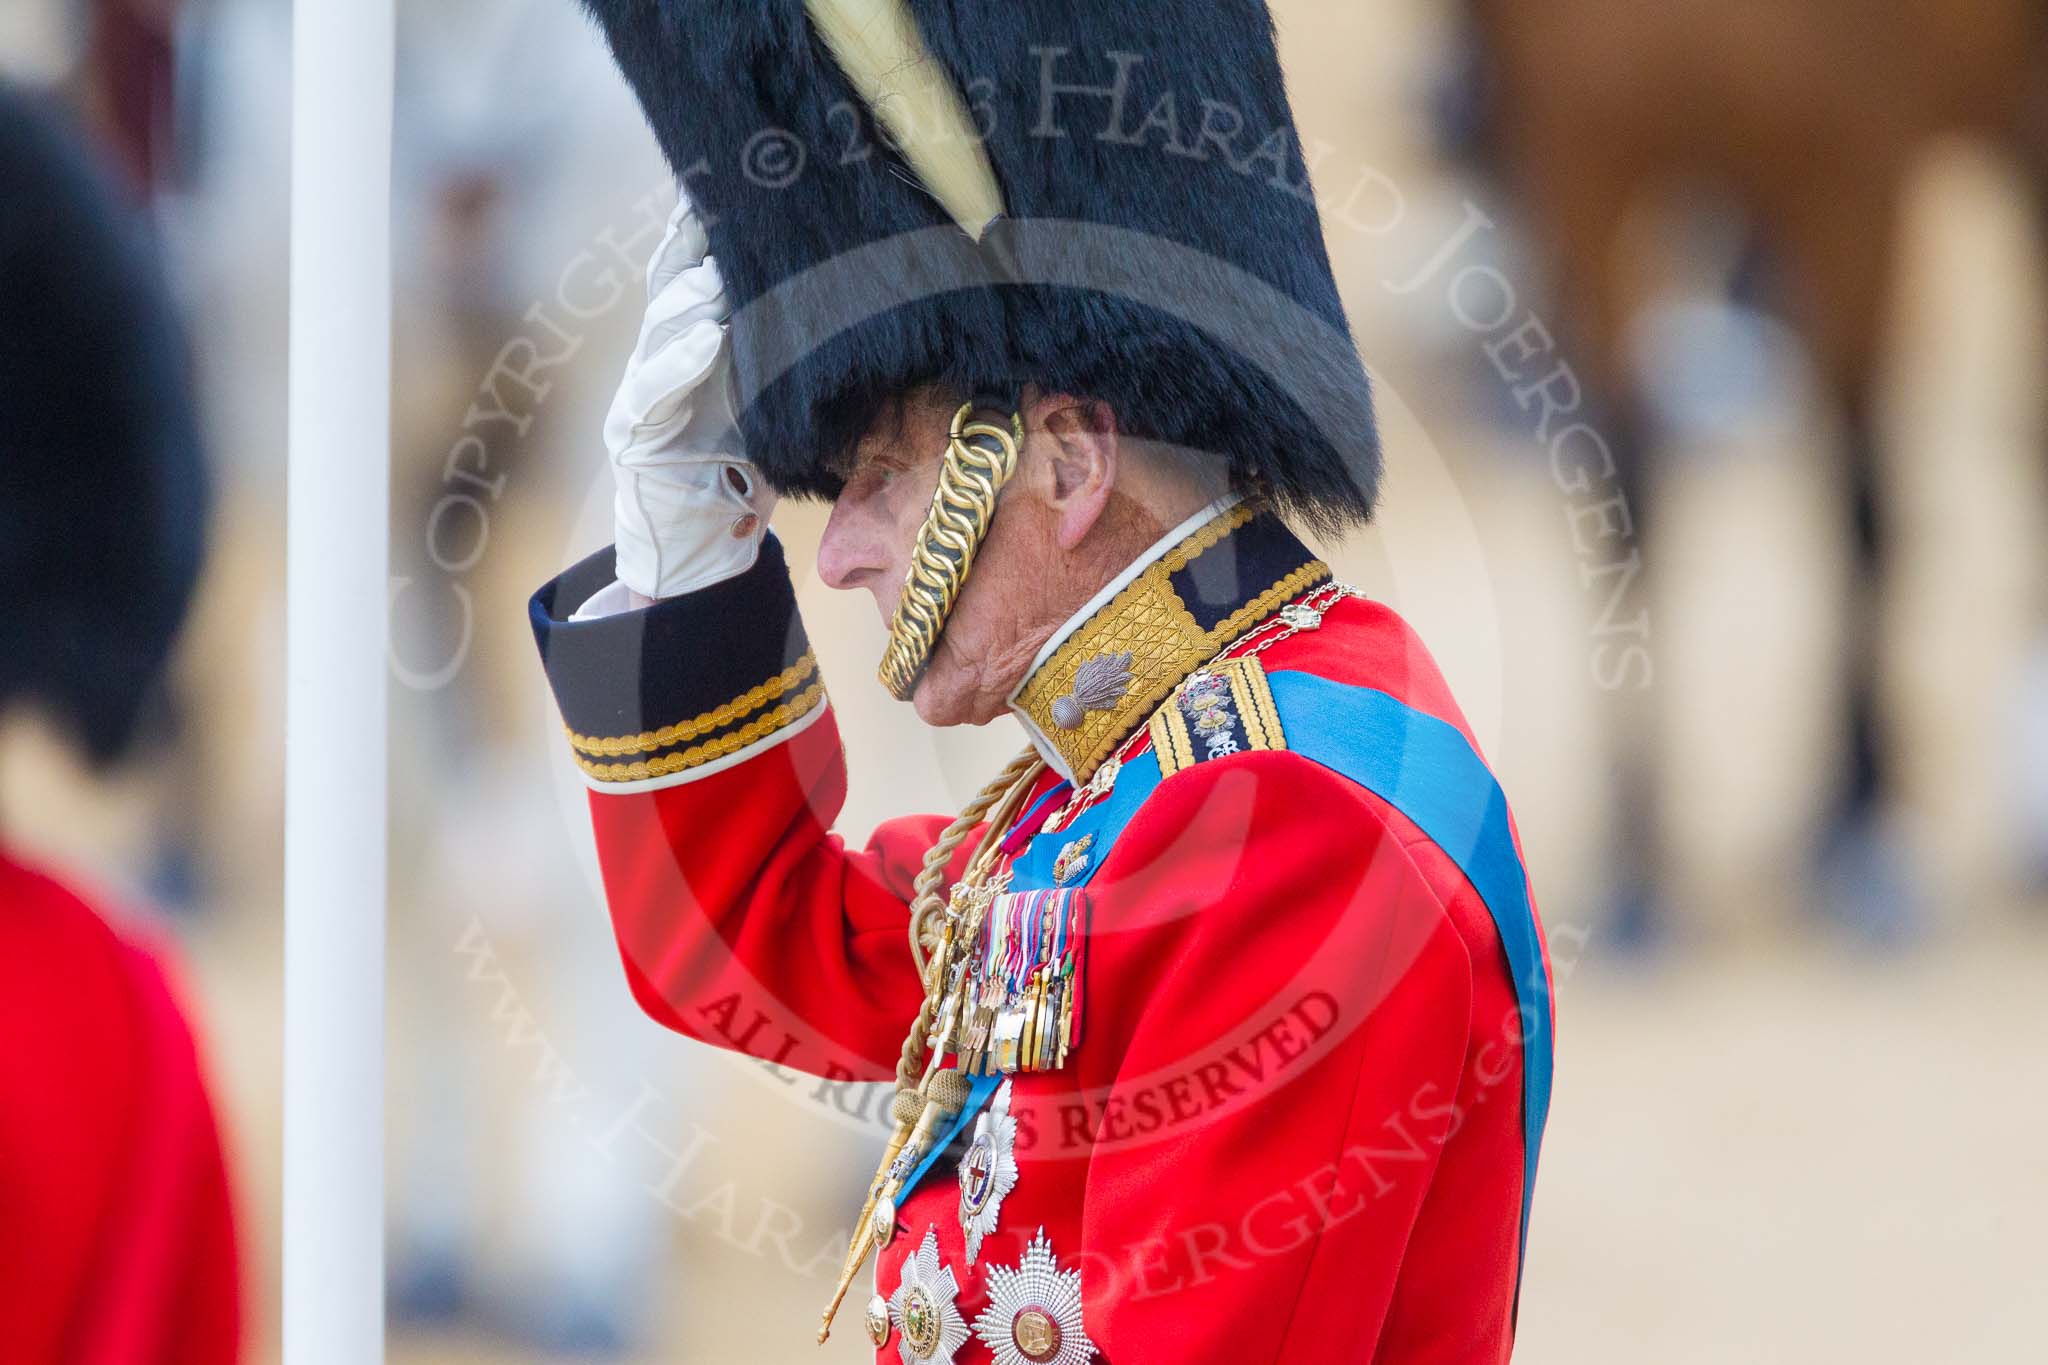 Trooping the Colour 2015. Image #255, 13 June 2015 11:00 Horse Guards Parade, London, UK